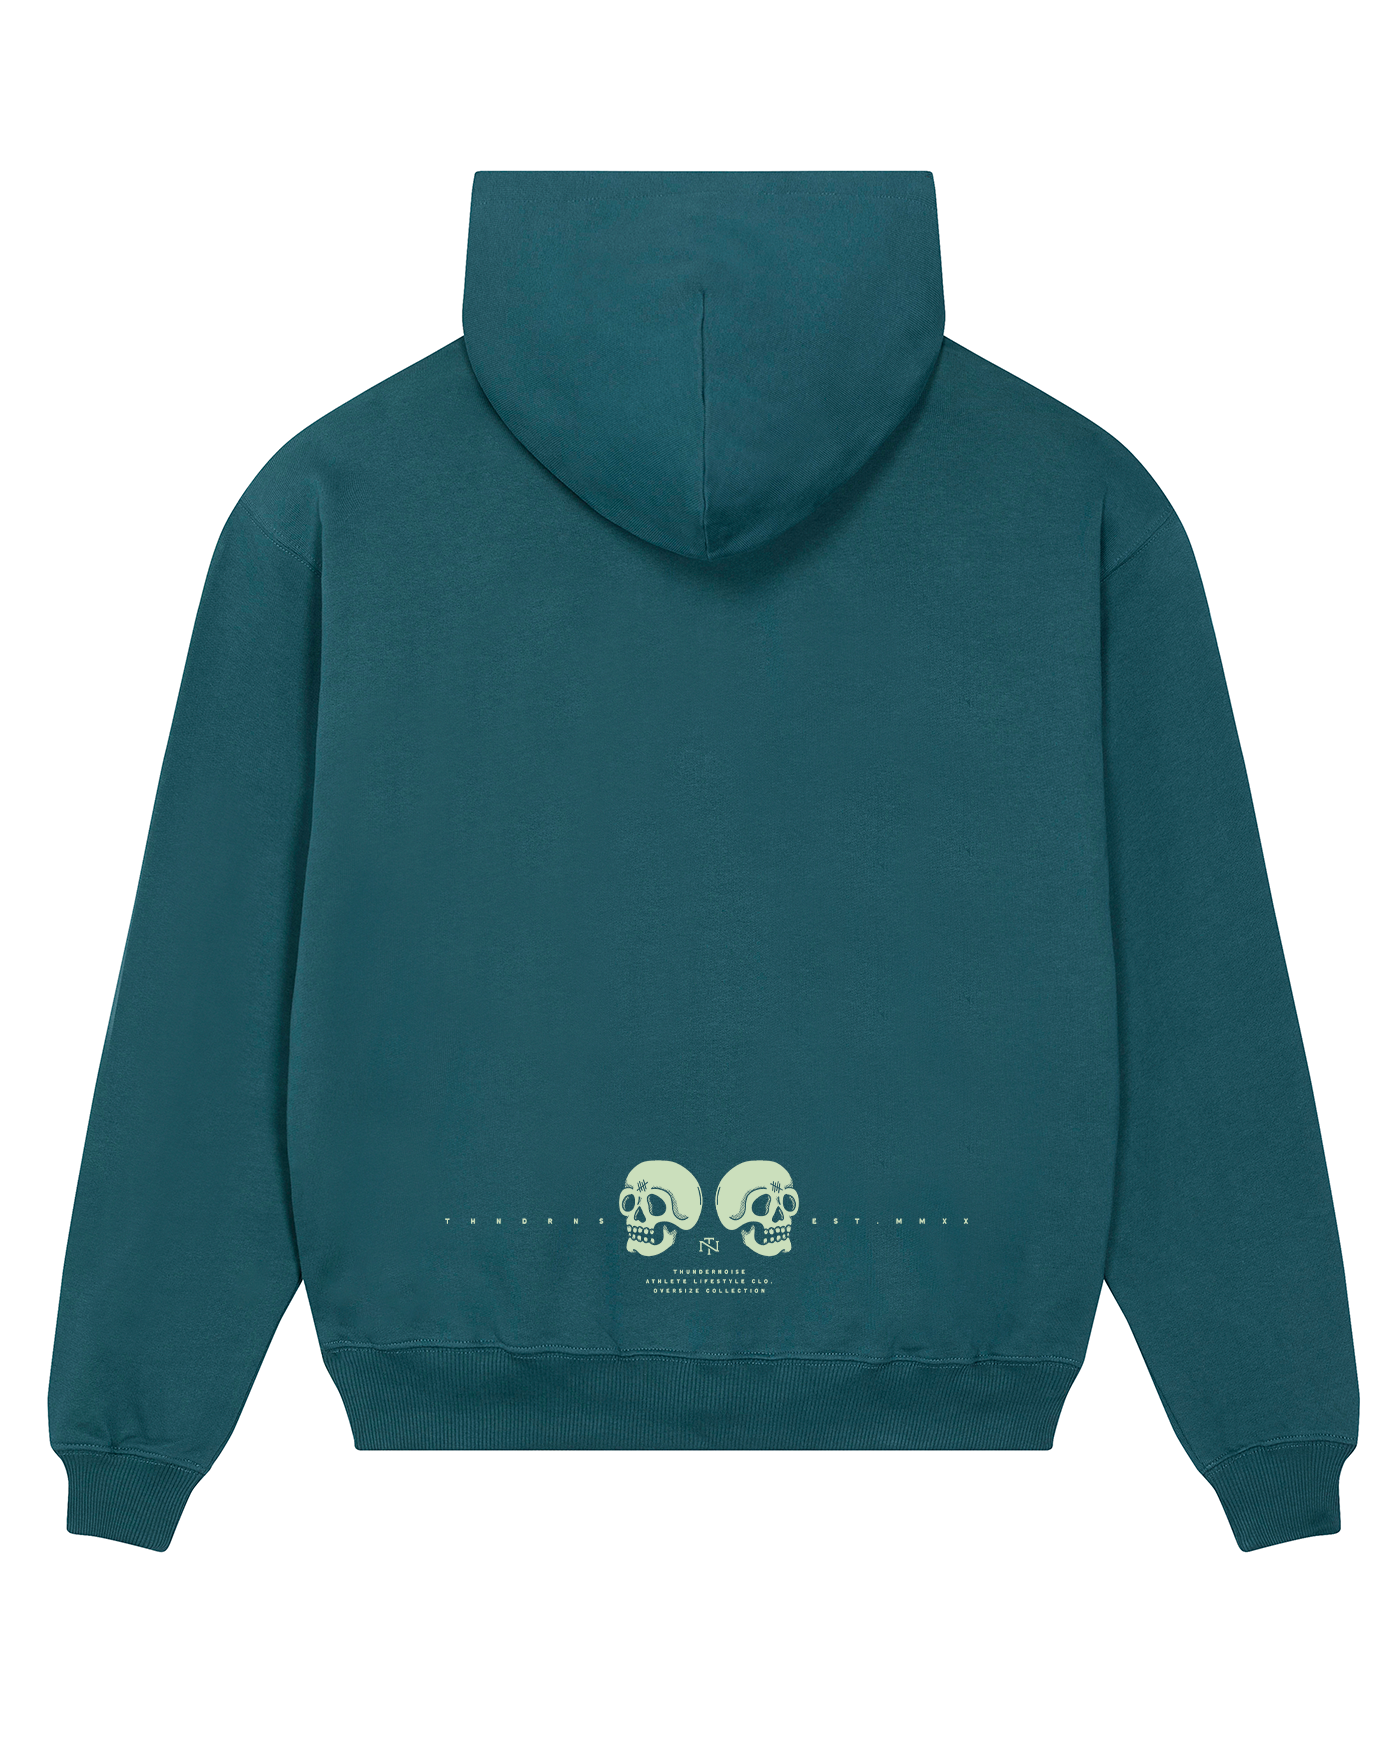 Every Rep Matters Oversize Hoodie - Green Petrol